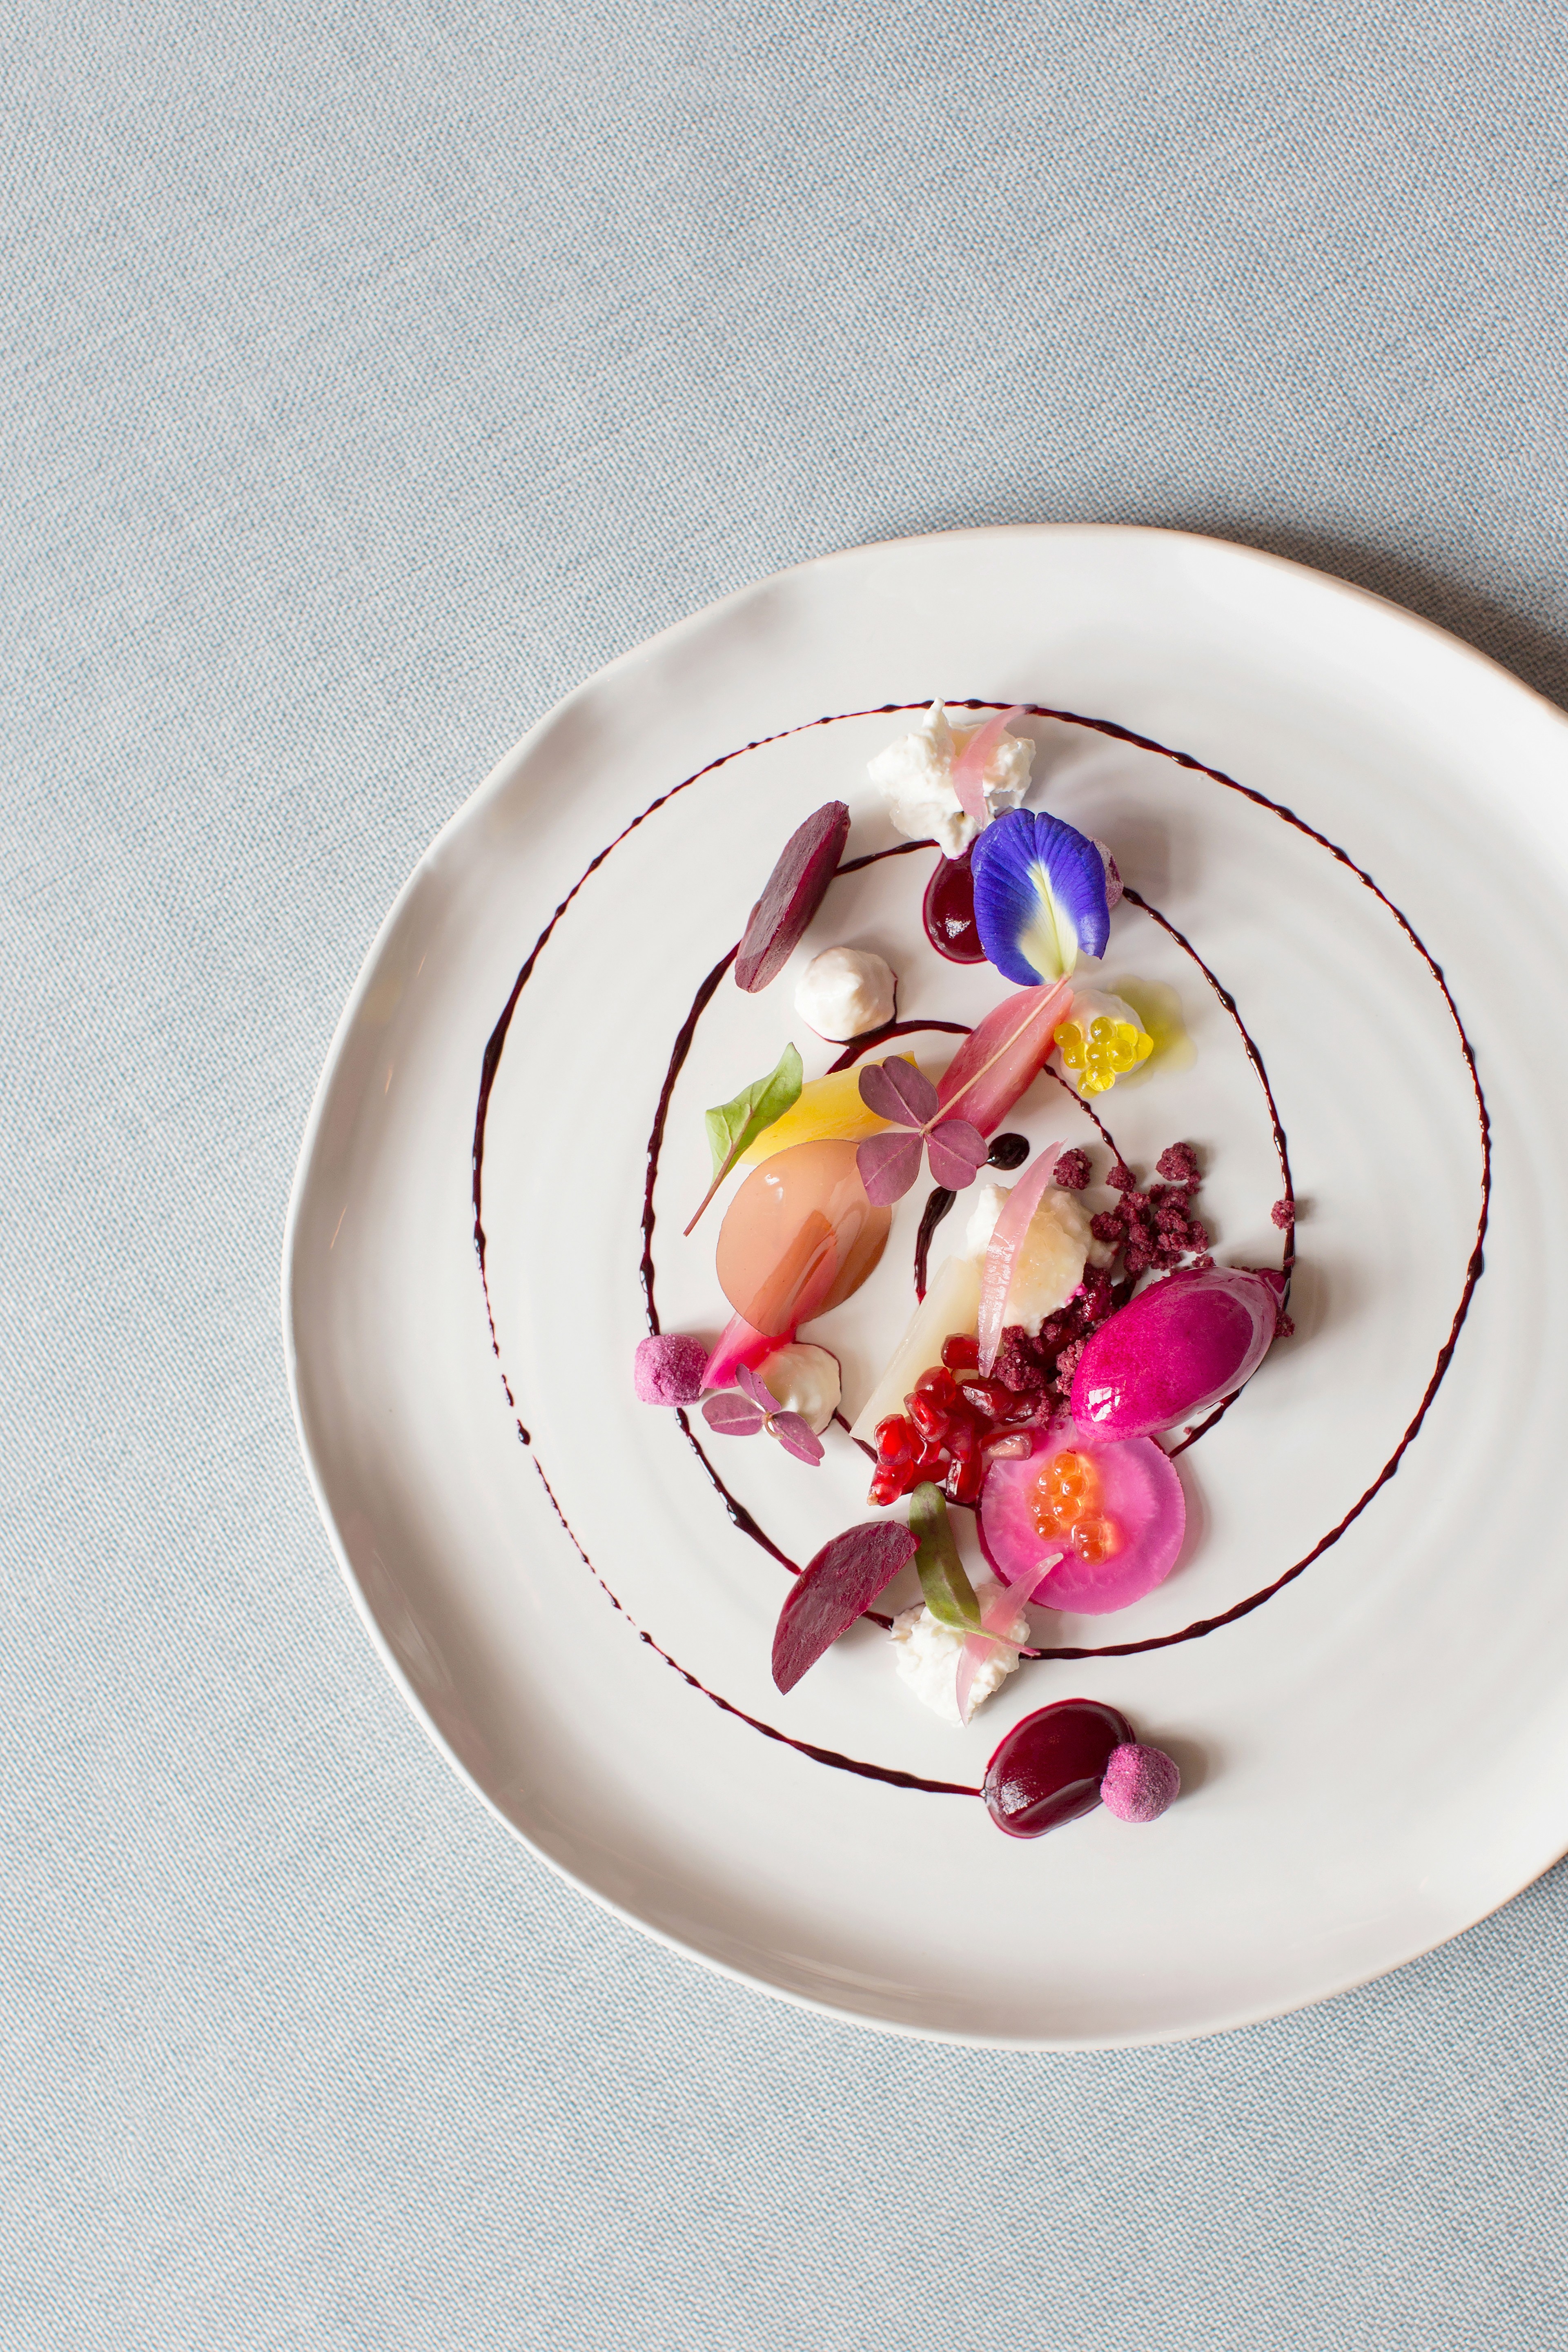 Signature heirloom beetroot dish at Odette, Julien Royer’s two-Michelin-star French restaurant in Singapore.